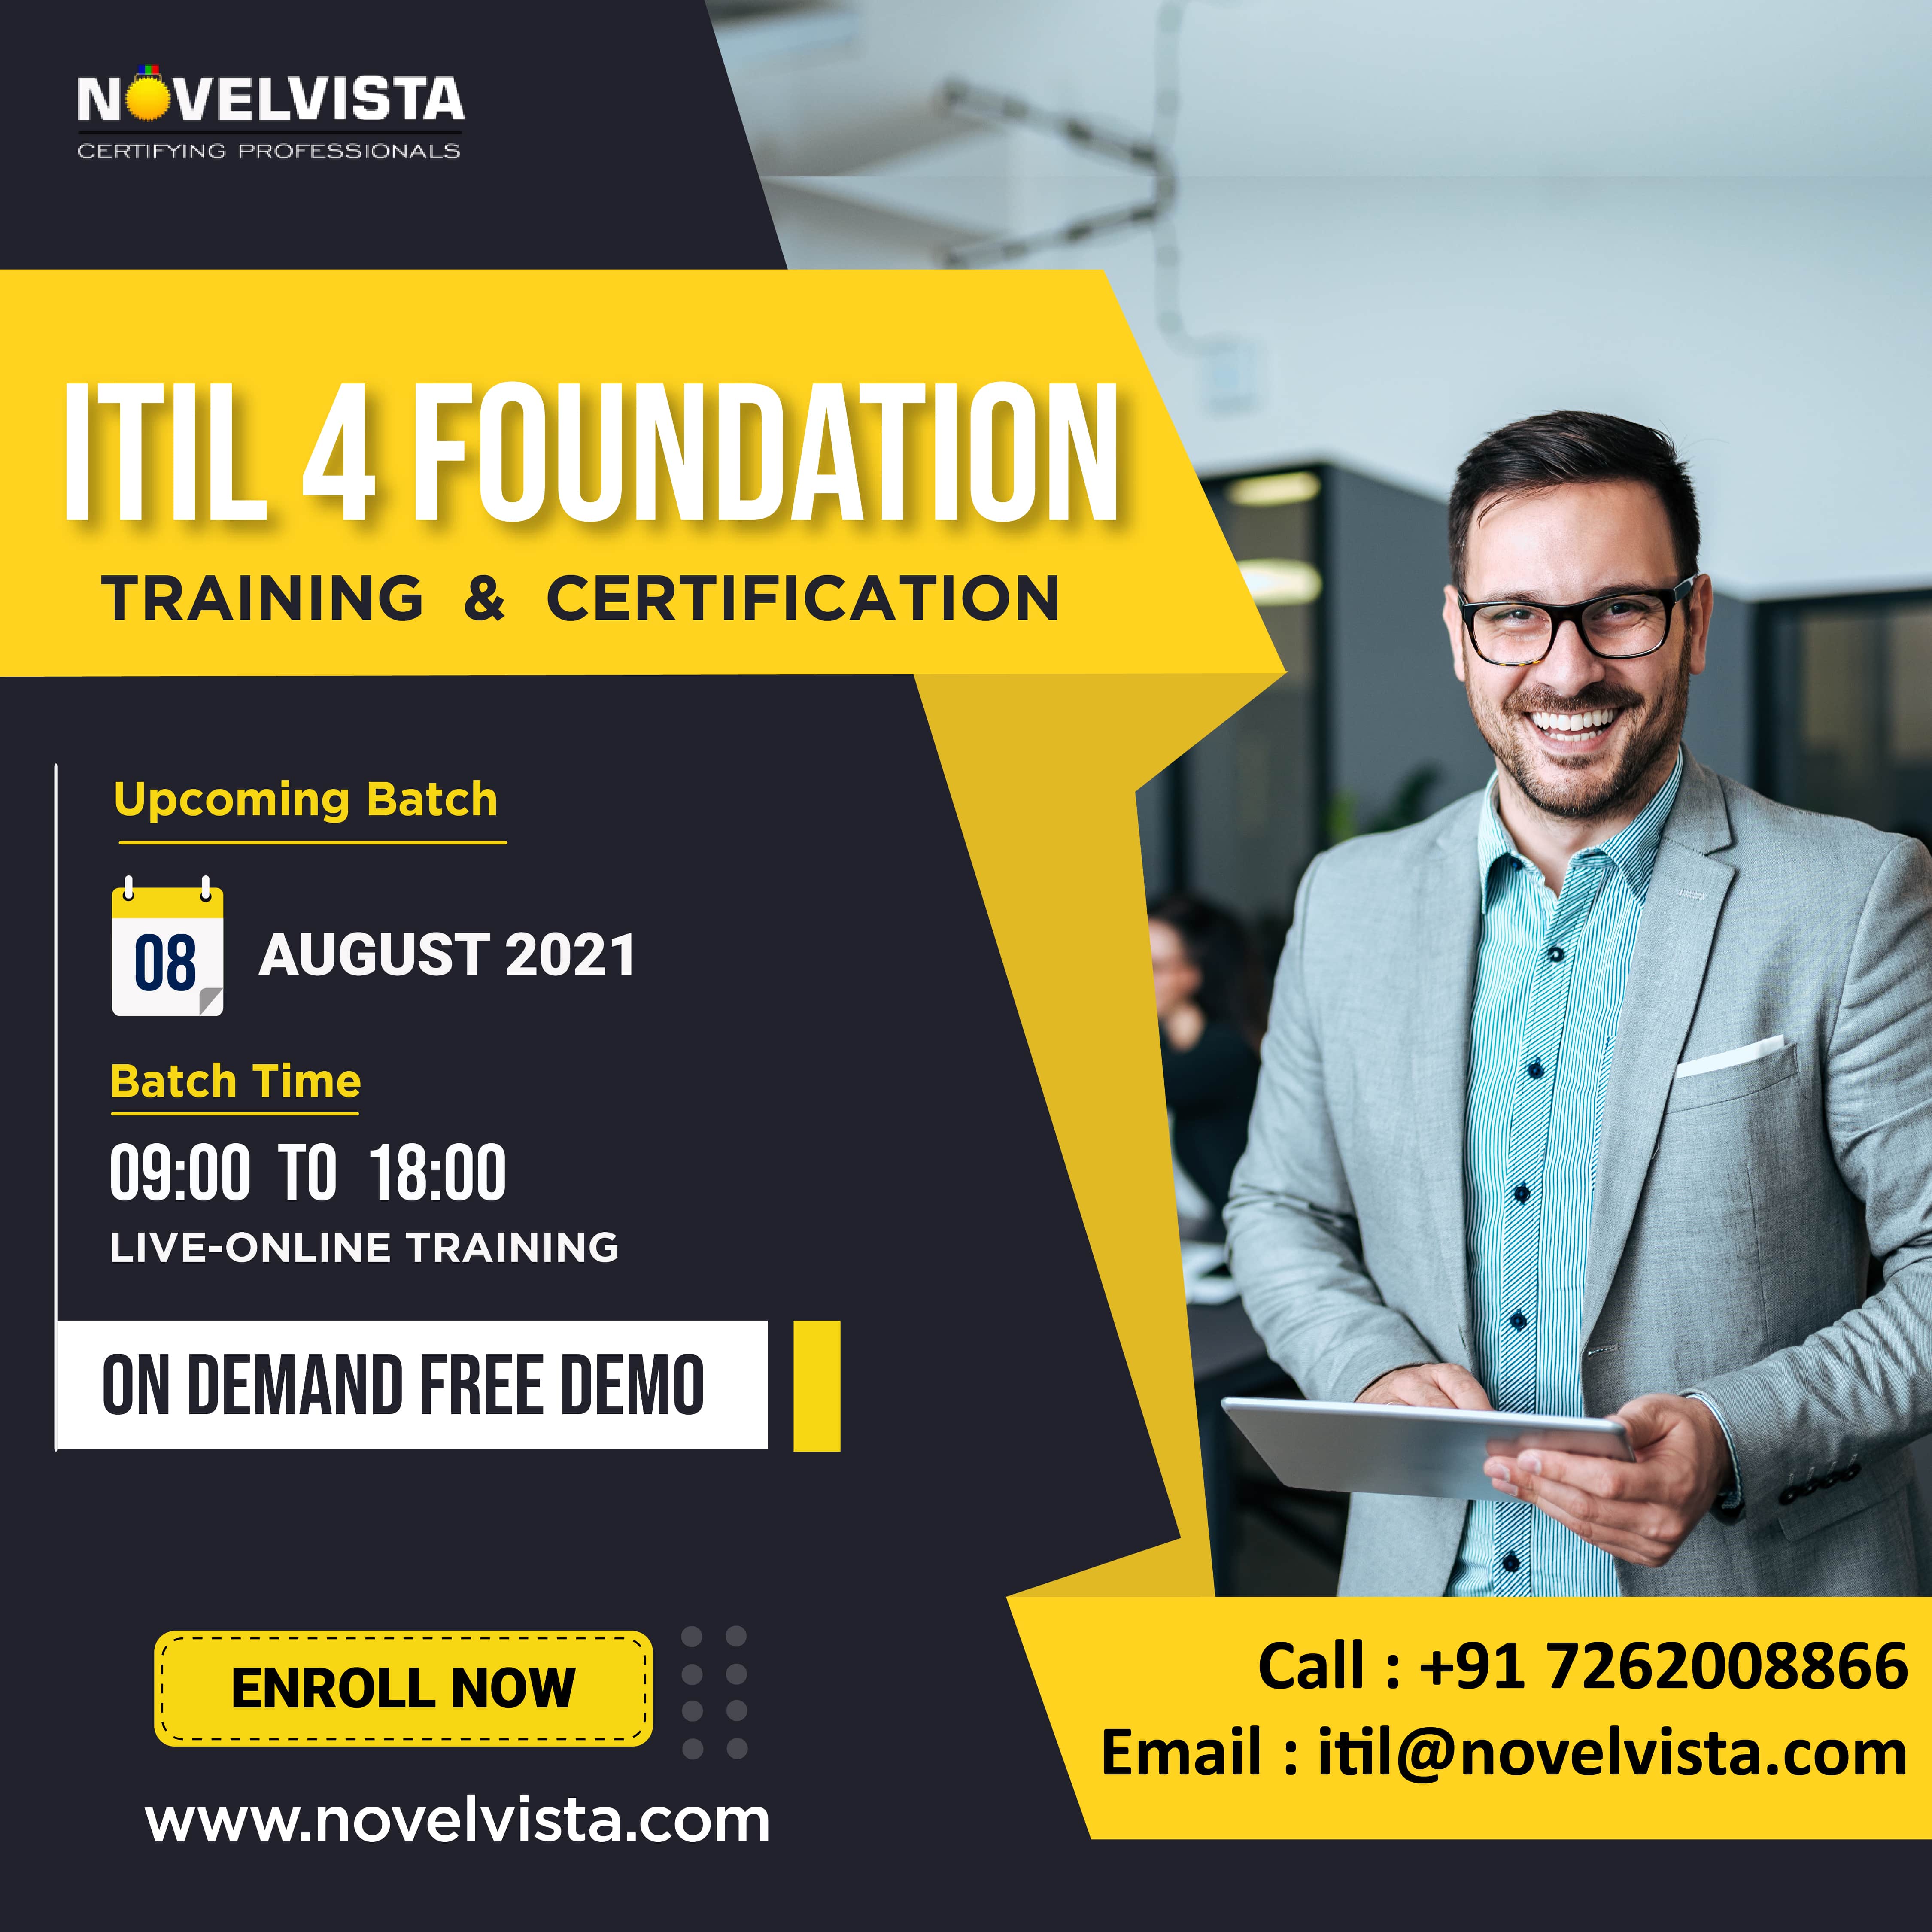 Register Now For Our Best ITIL 4 Foundation Certification Training Program., Chennai, Tamil Nadu, India